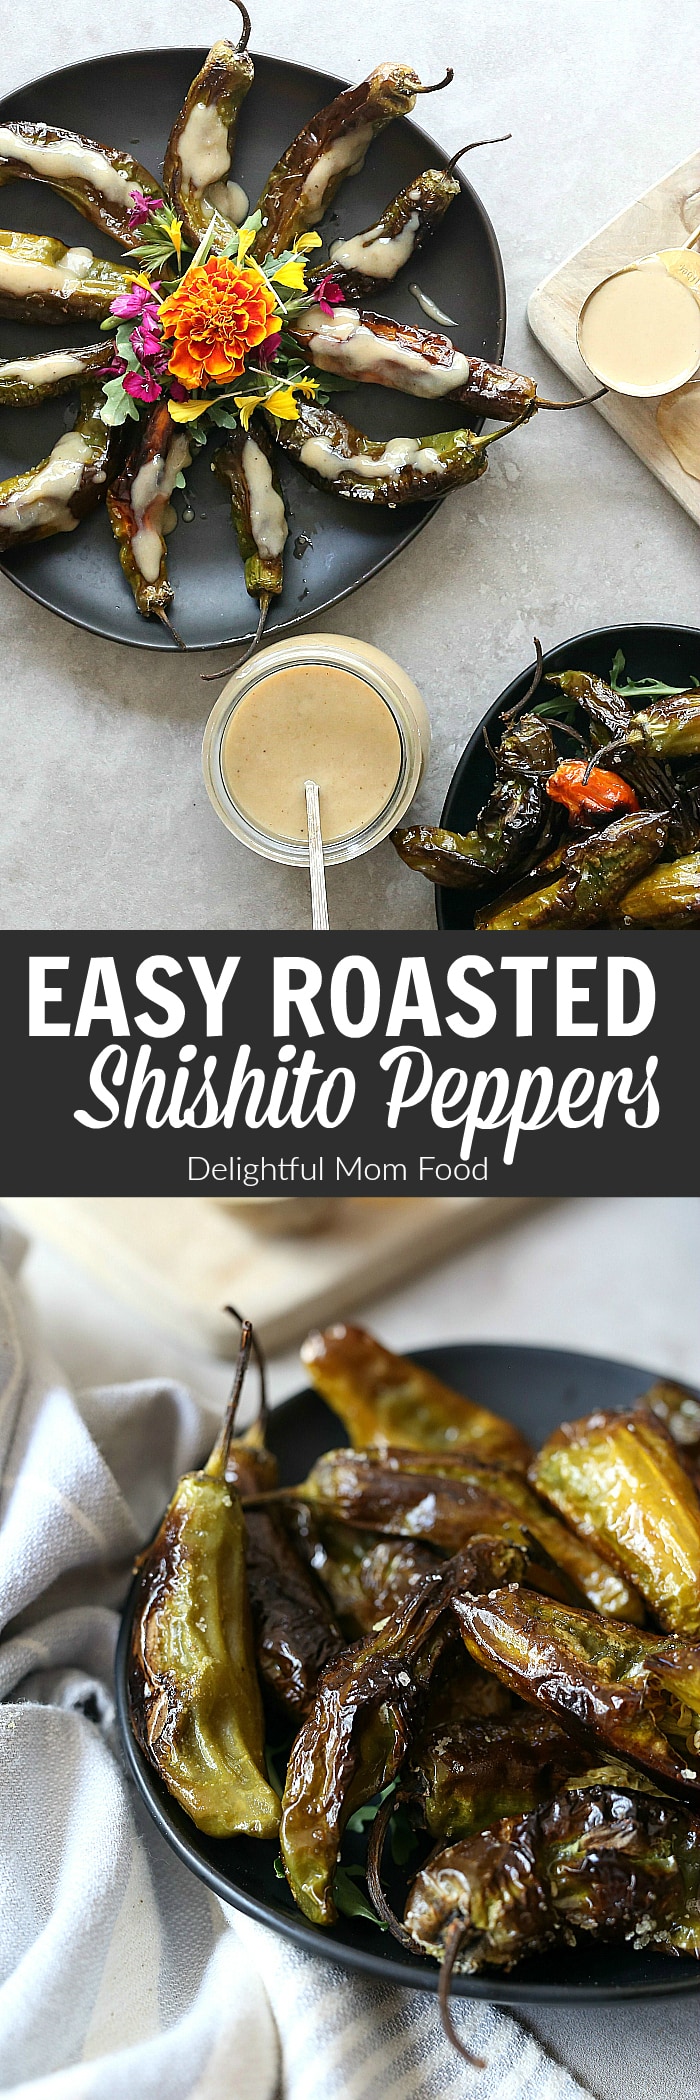 Roasted shishito peppers are a favorite appetizer around here! Ready in 25 minutes and fantastic served dipped in garlicky rich tahini sauce. | #roasted #shishito #peppers #recipe #easy #healthy #glutenfree #tahini #sauce #dressing | Recipe at delightfulmomfood.com